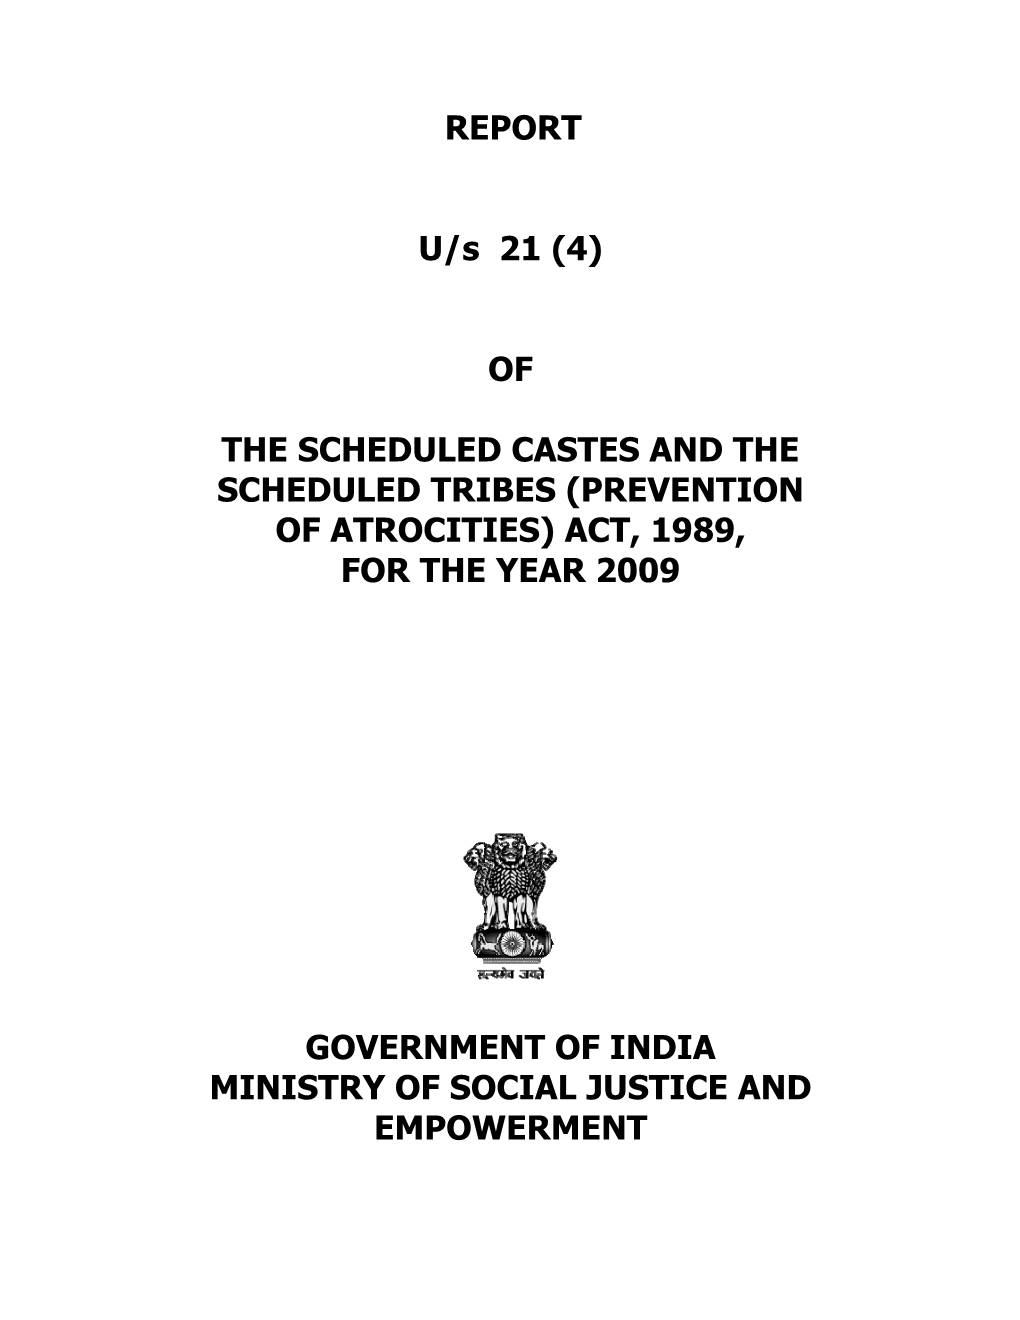 (Prevention of Atrocities) Act, 1989, for the Year 2009